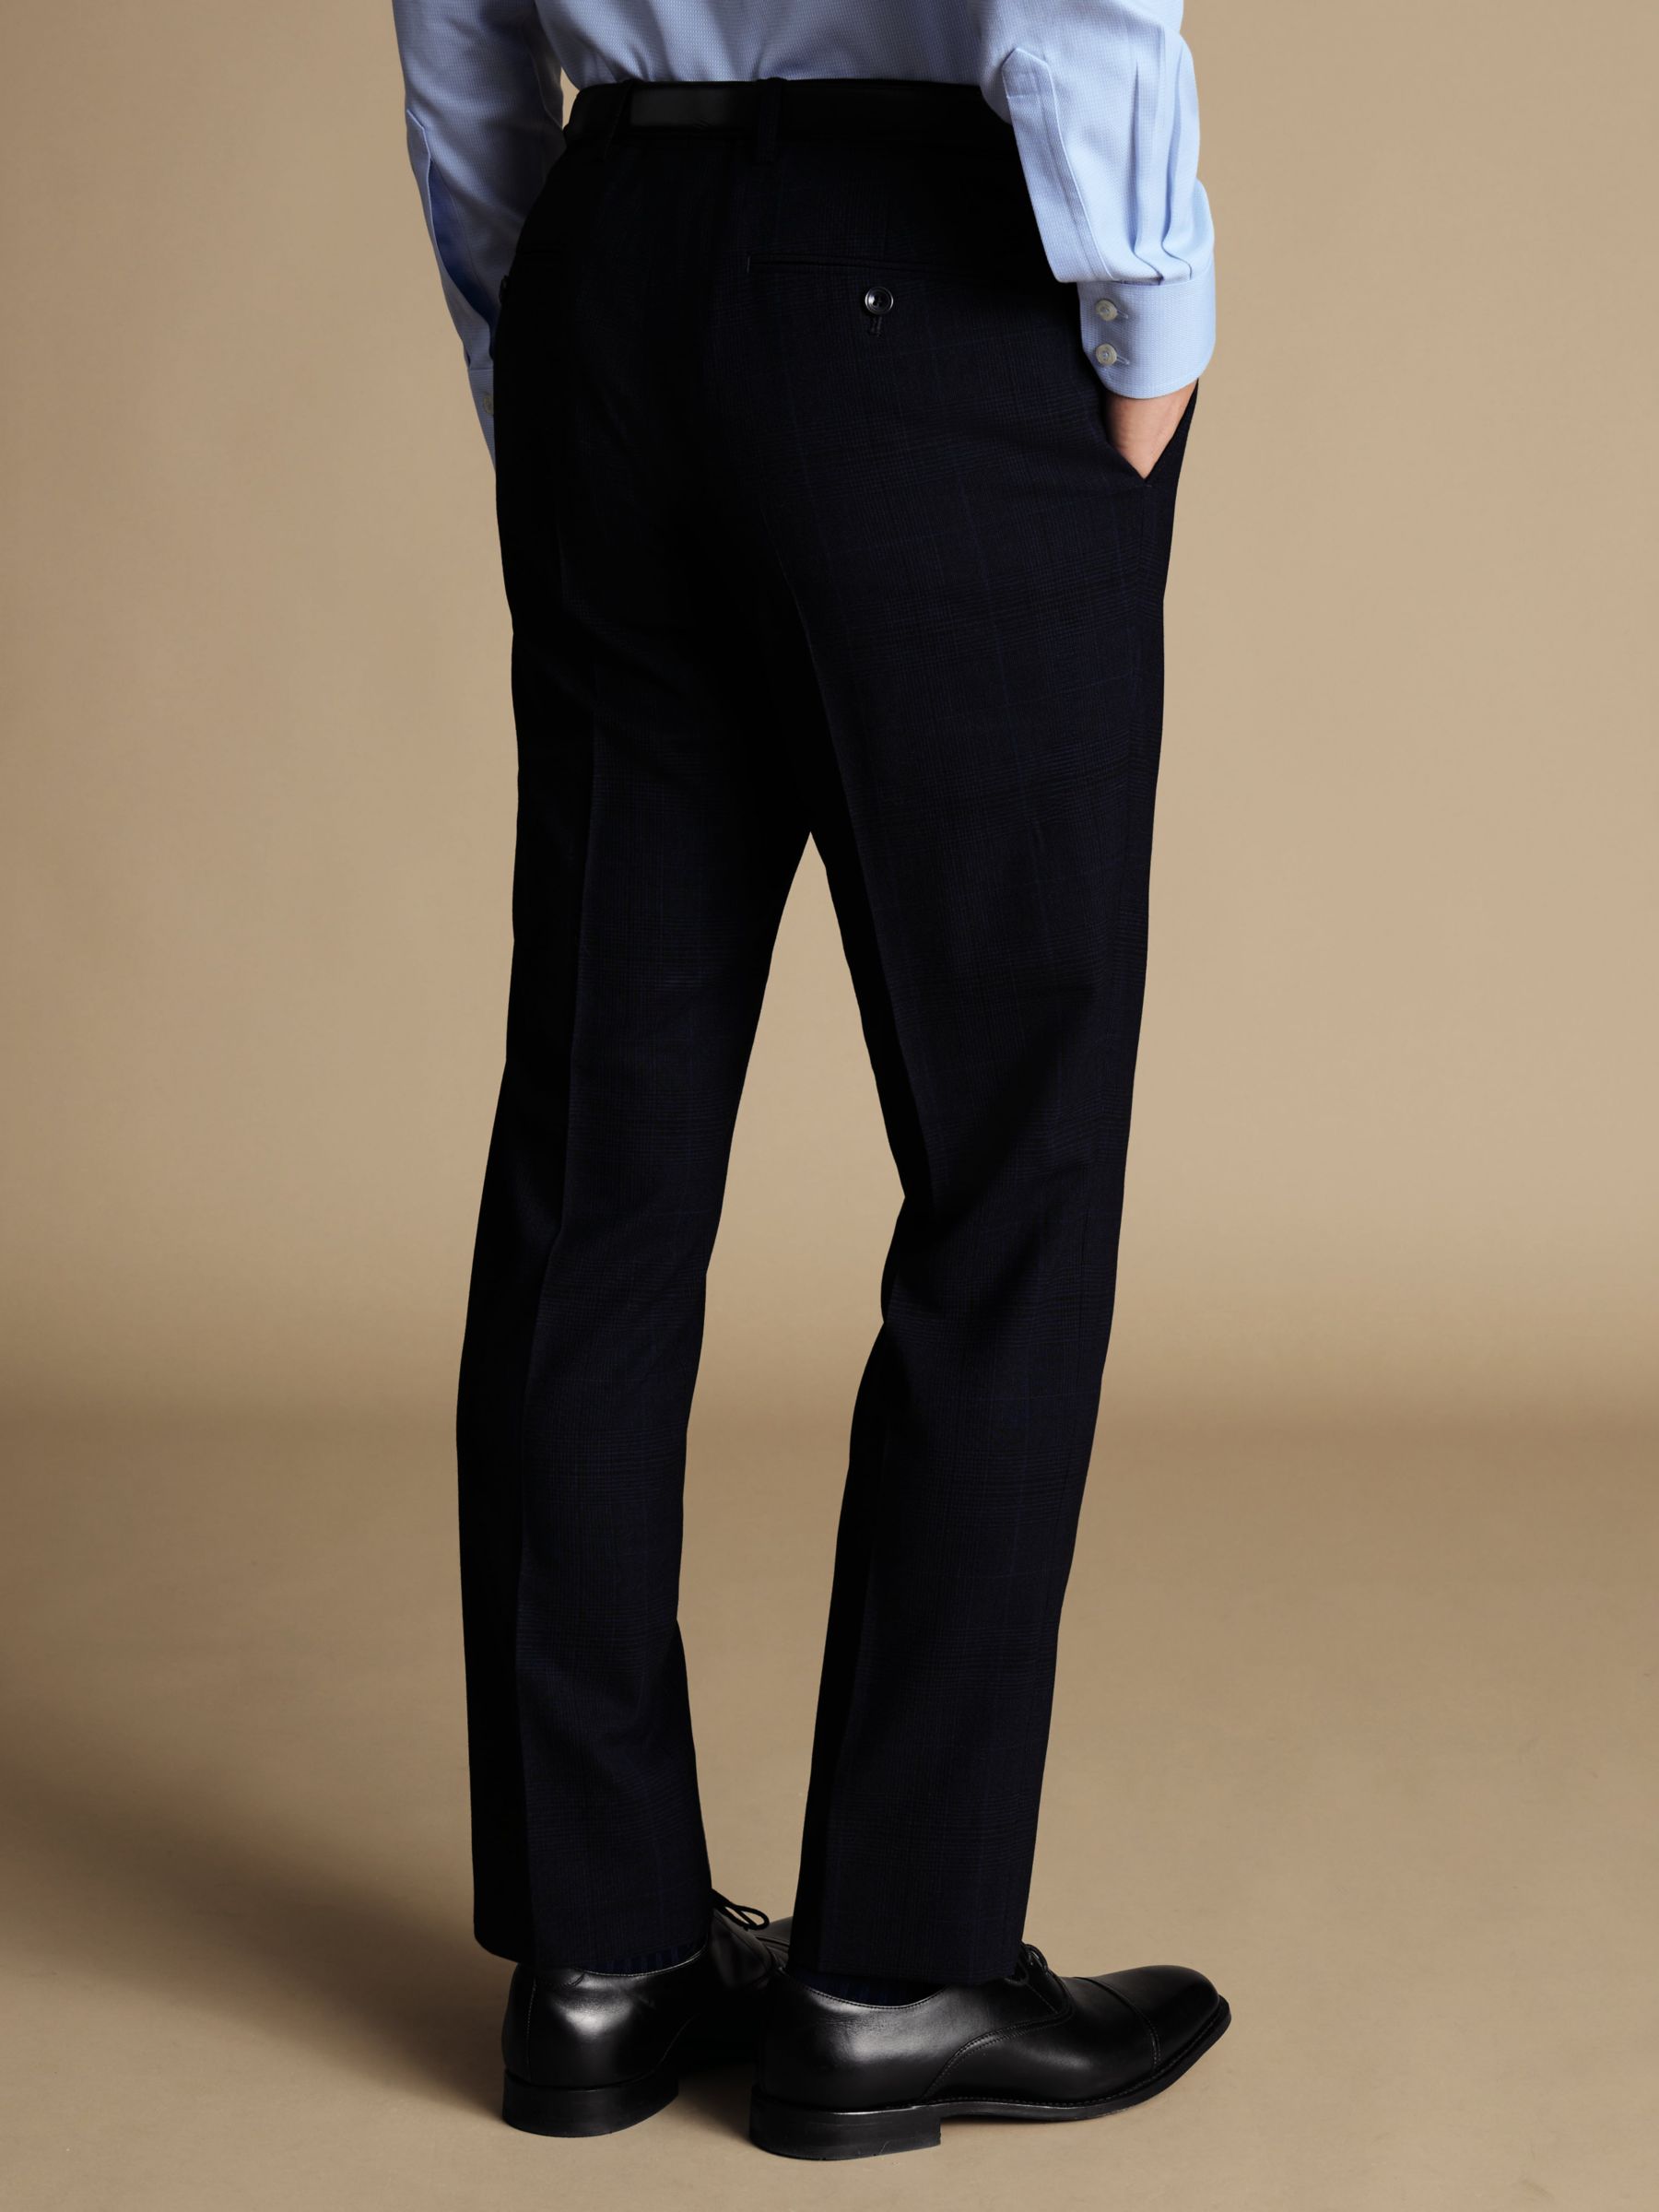 Charles Tyrwhitt Prince of Wales Slim Fit Ultimate Performance Suit Trousers, Navy, W30/L30